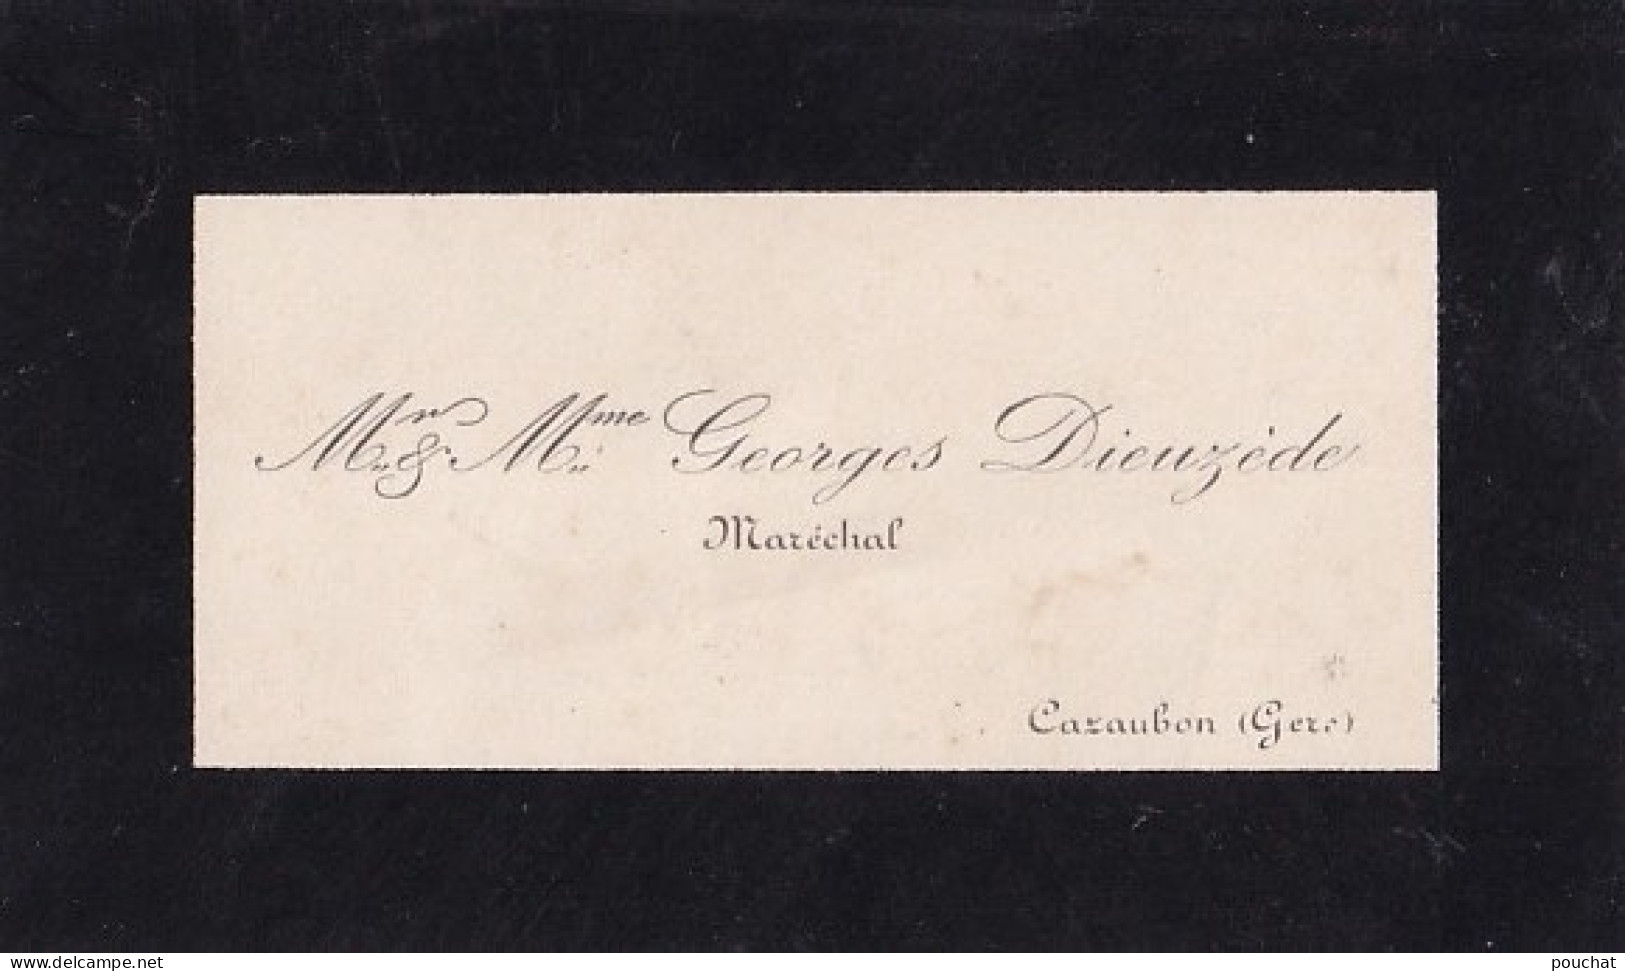 F12- CAZAUBON (GERS) Mr & Mme GEORGES DIEUZEDE - MARCHAL FERRANT - ( 2 SCANS ) - Visiting Cards